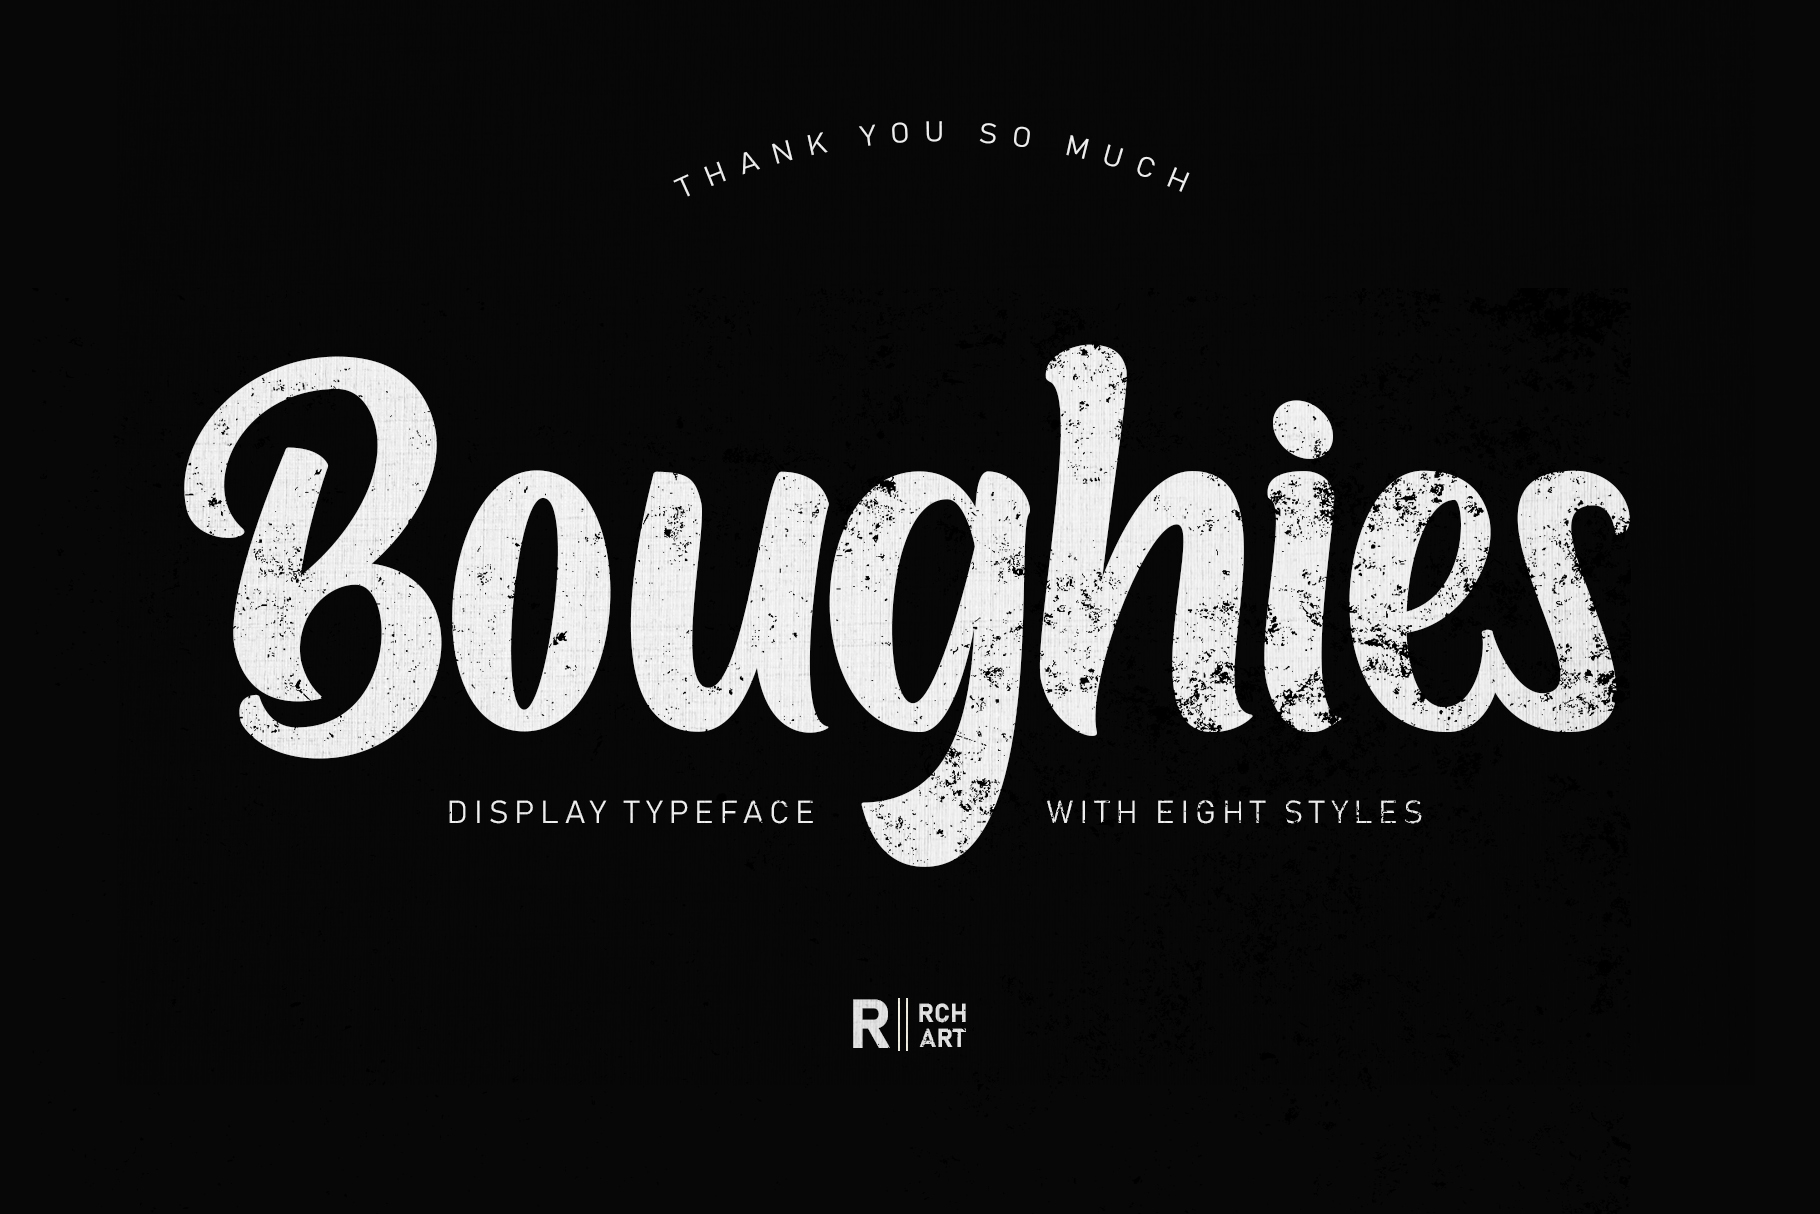 Free Font Boughies